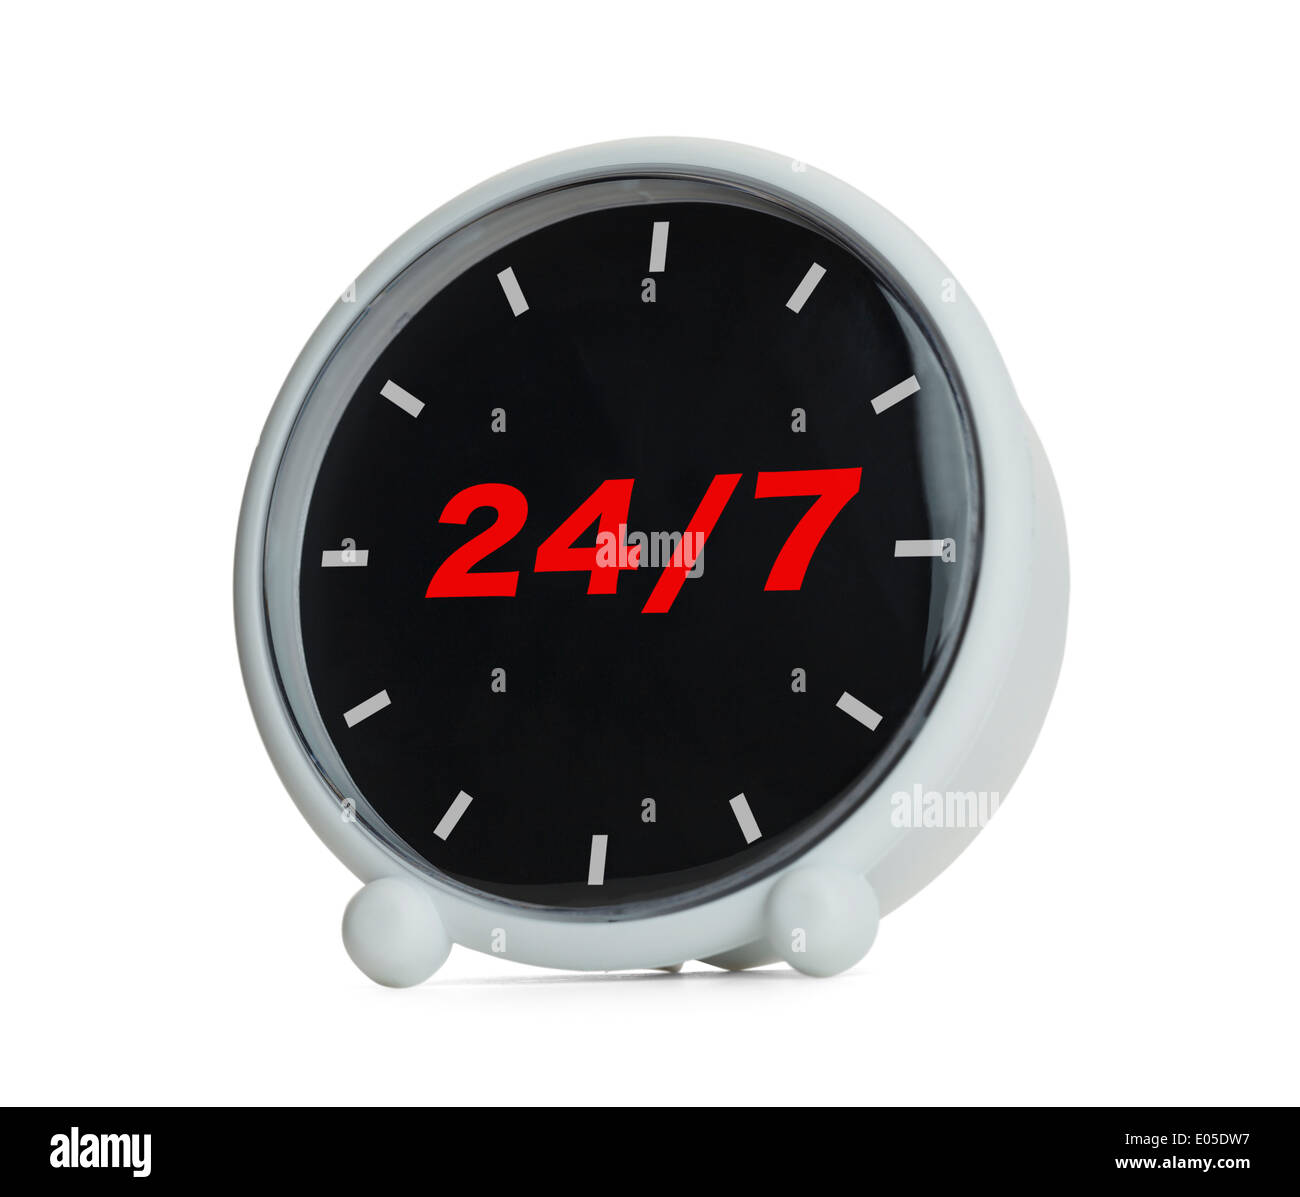 Clock with 24/7 in red Isolated on White Background. Stock Photo